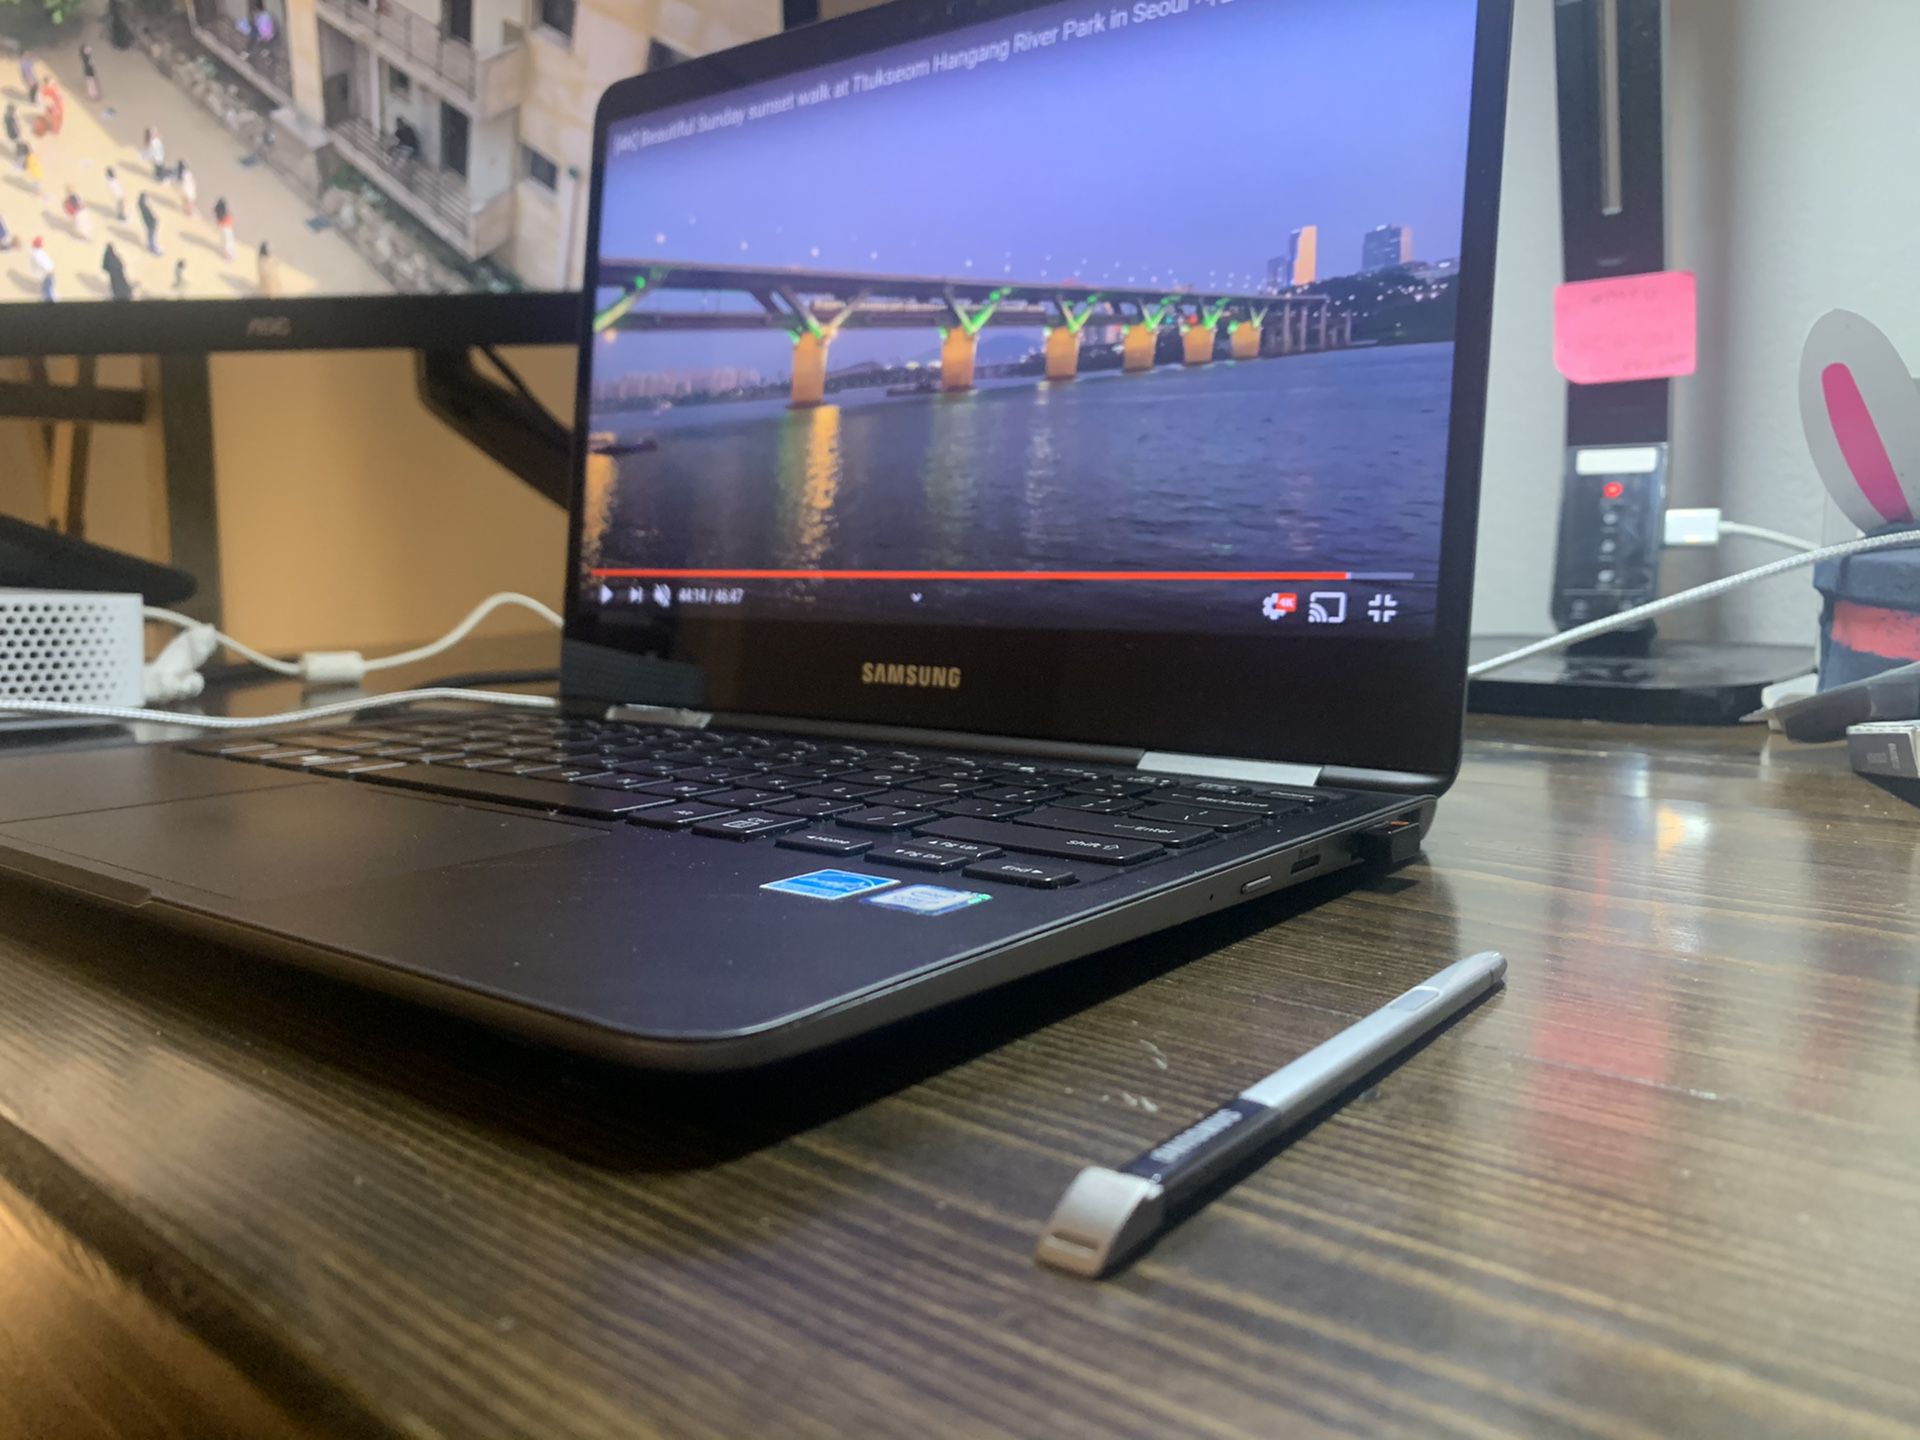 SAMSUNG notebook 9 pro 13inch touch screen comes with a pen